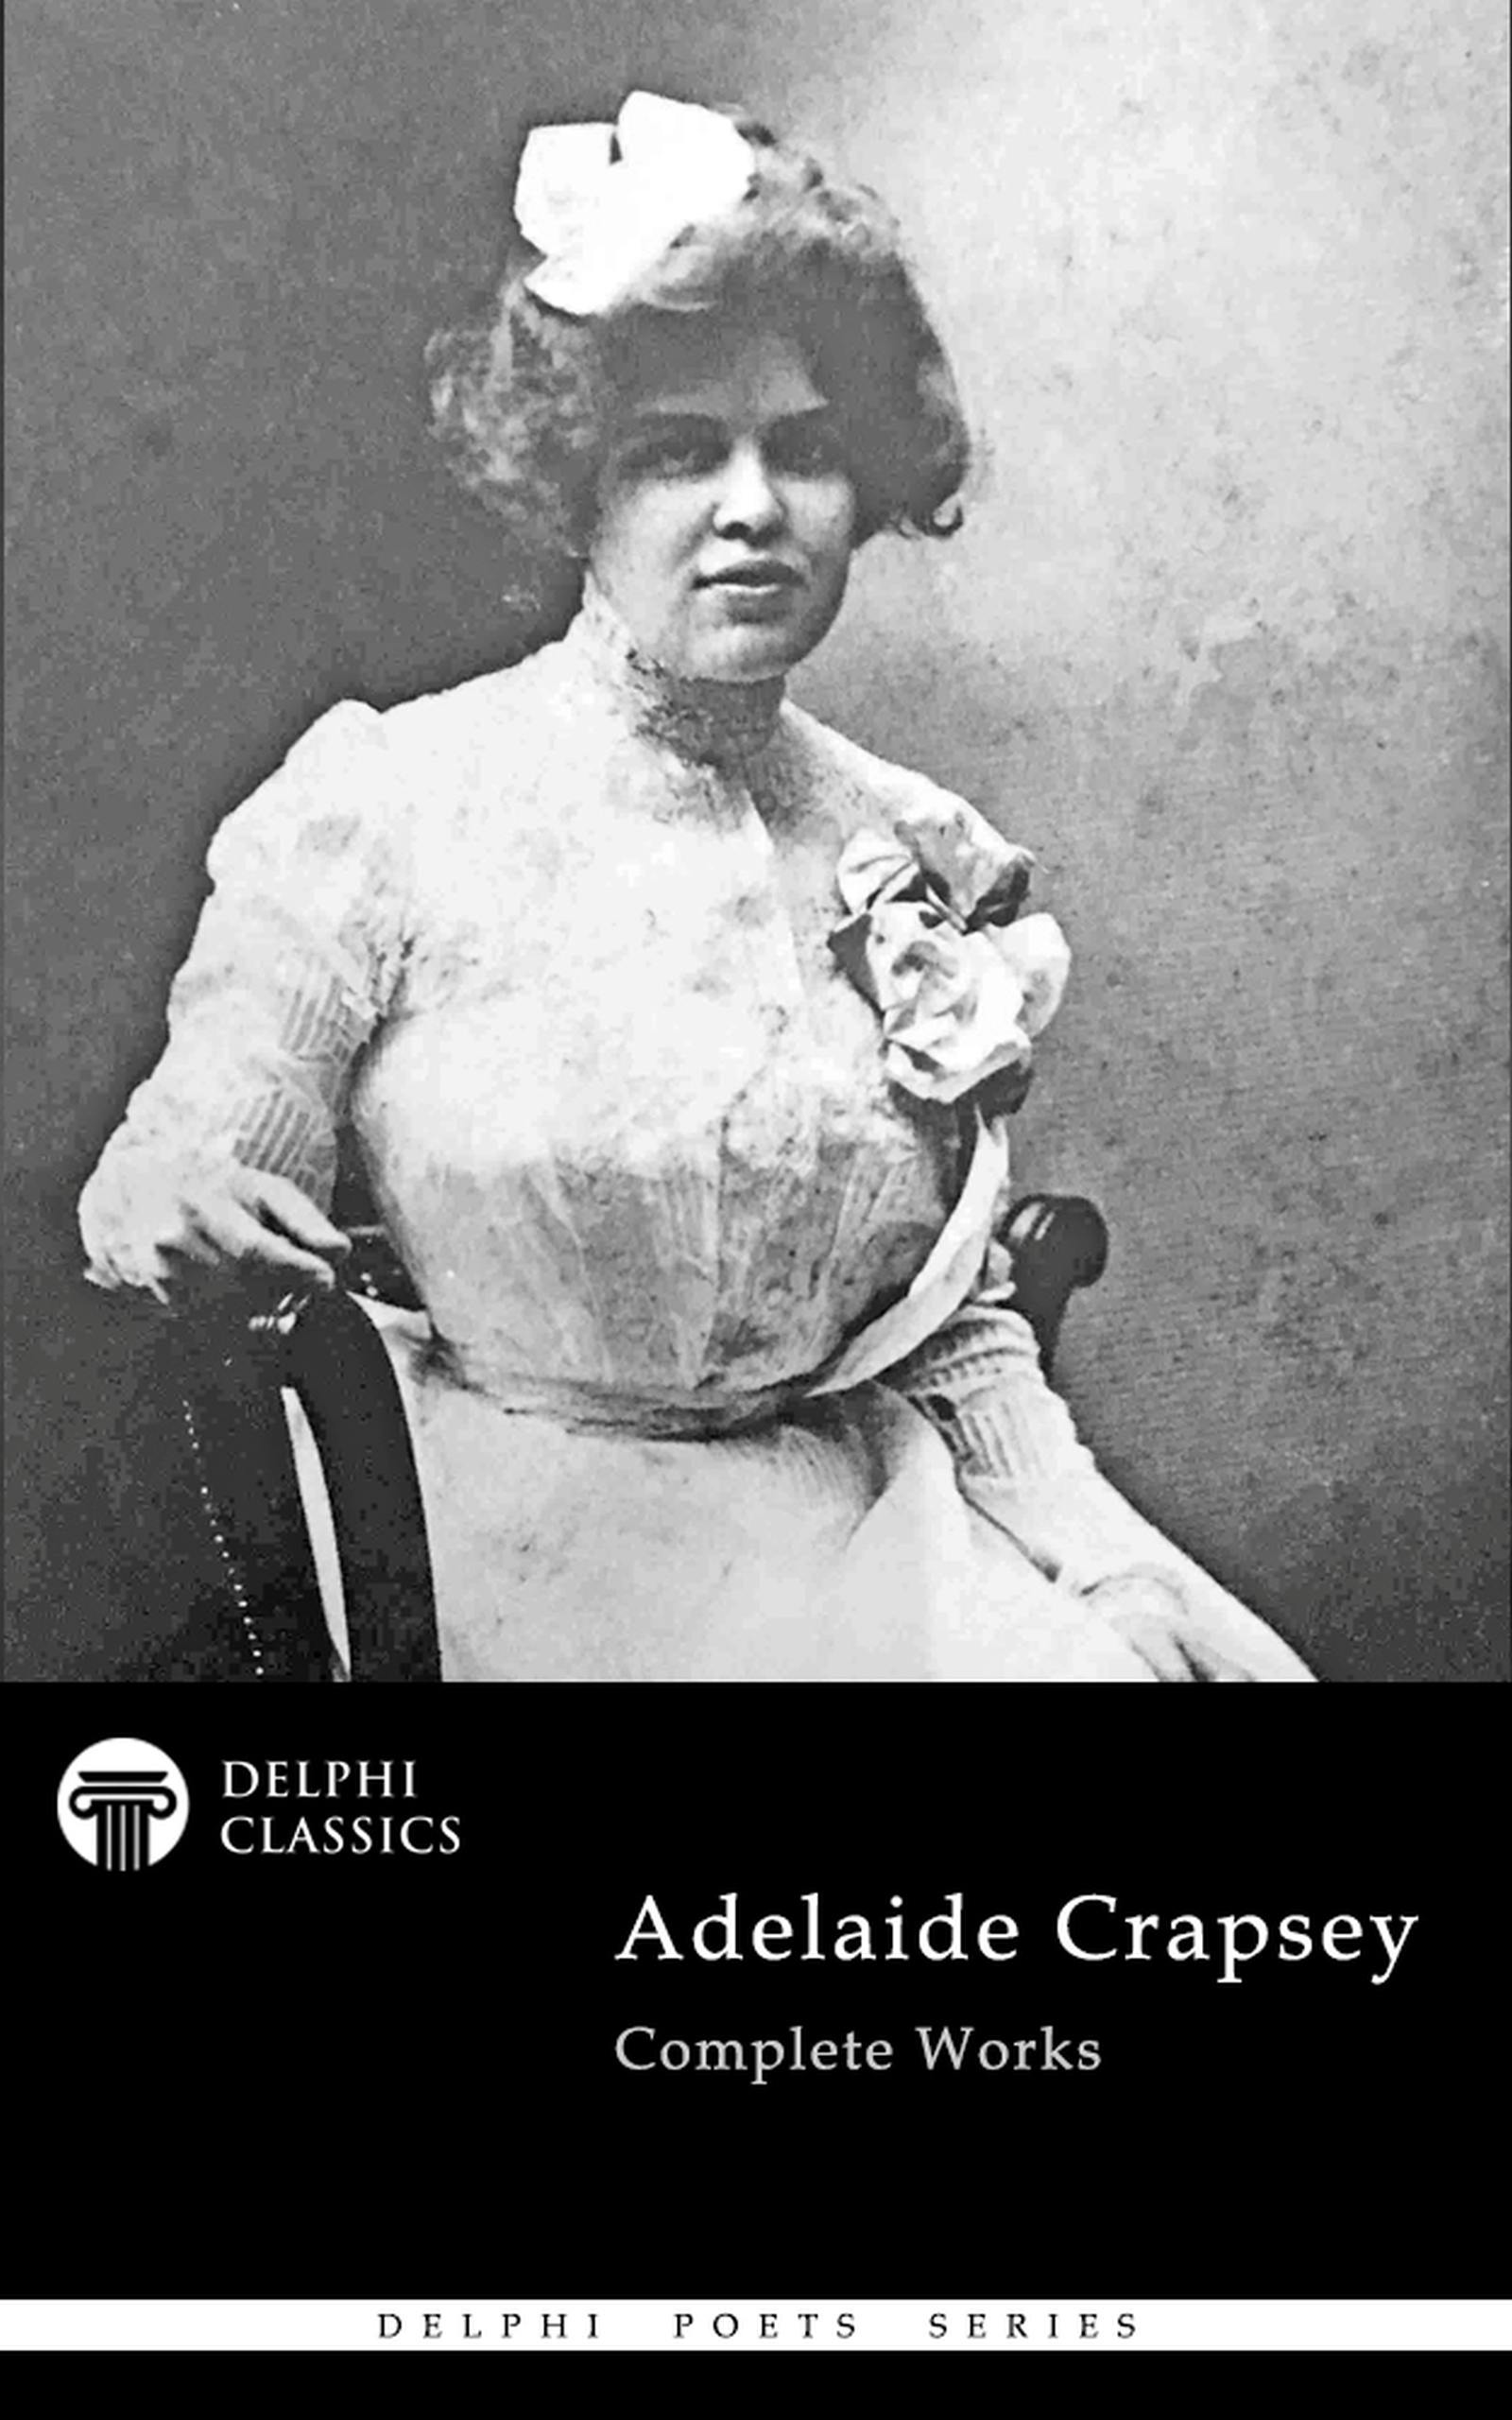 Delphi Complete Works of Adelaide Crapsey (Illustrated) - Adelaide Crapsey